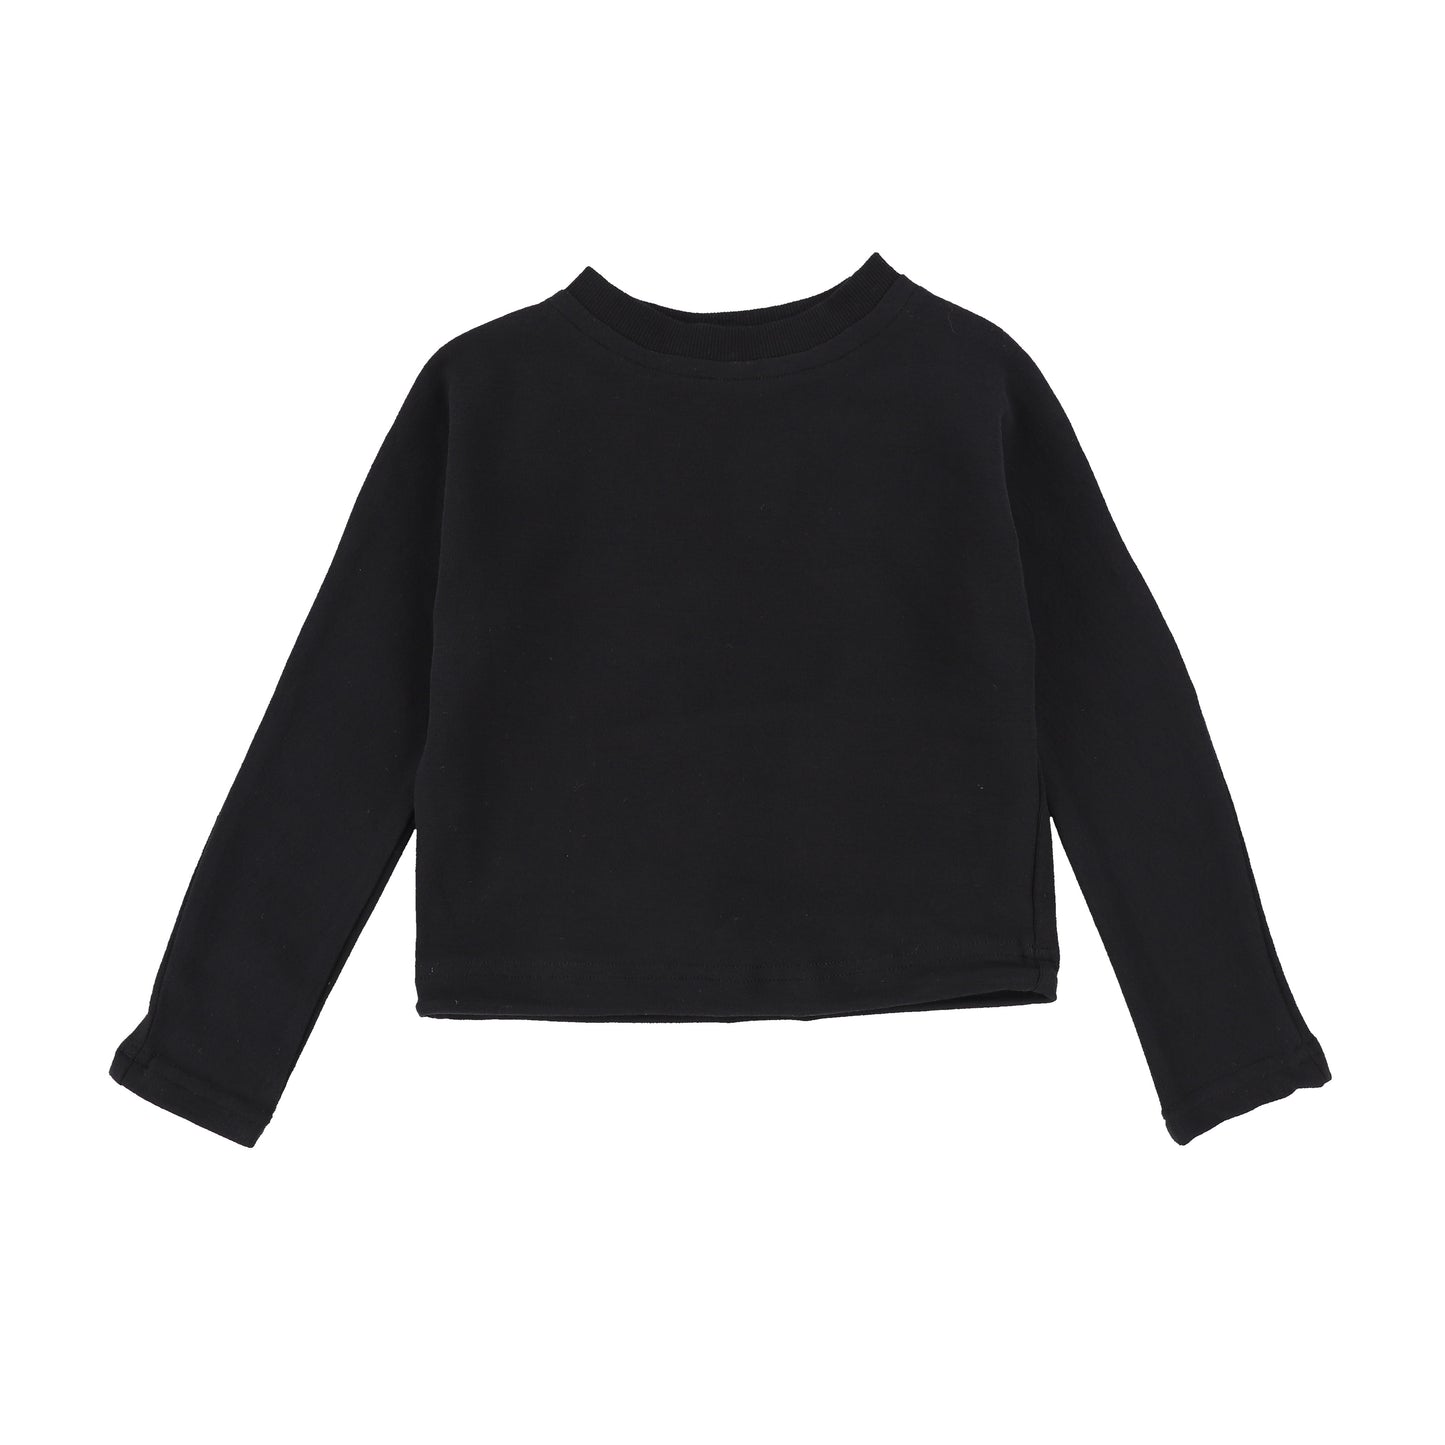 Bace Collection Black Cropped Drawstring Top [Final Sale]